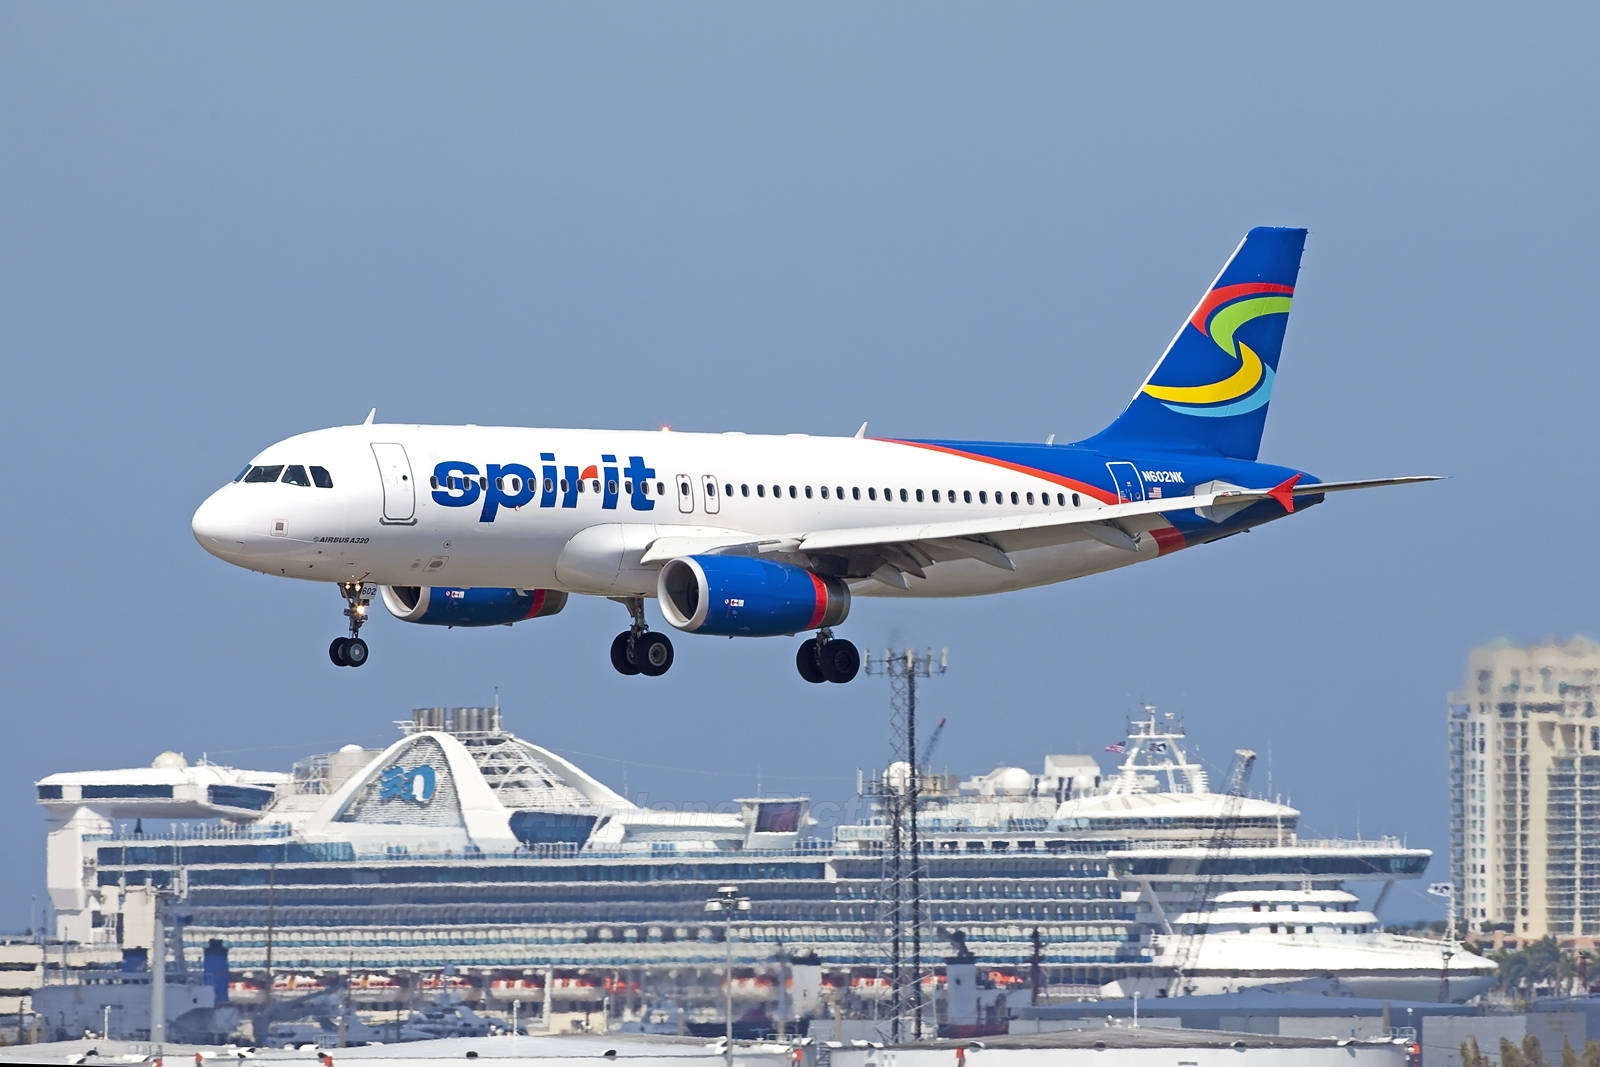 Spirit Airlines Airplane And Cruise Ship Wallpaper